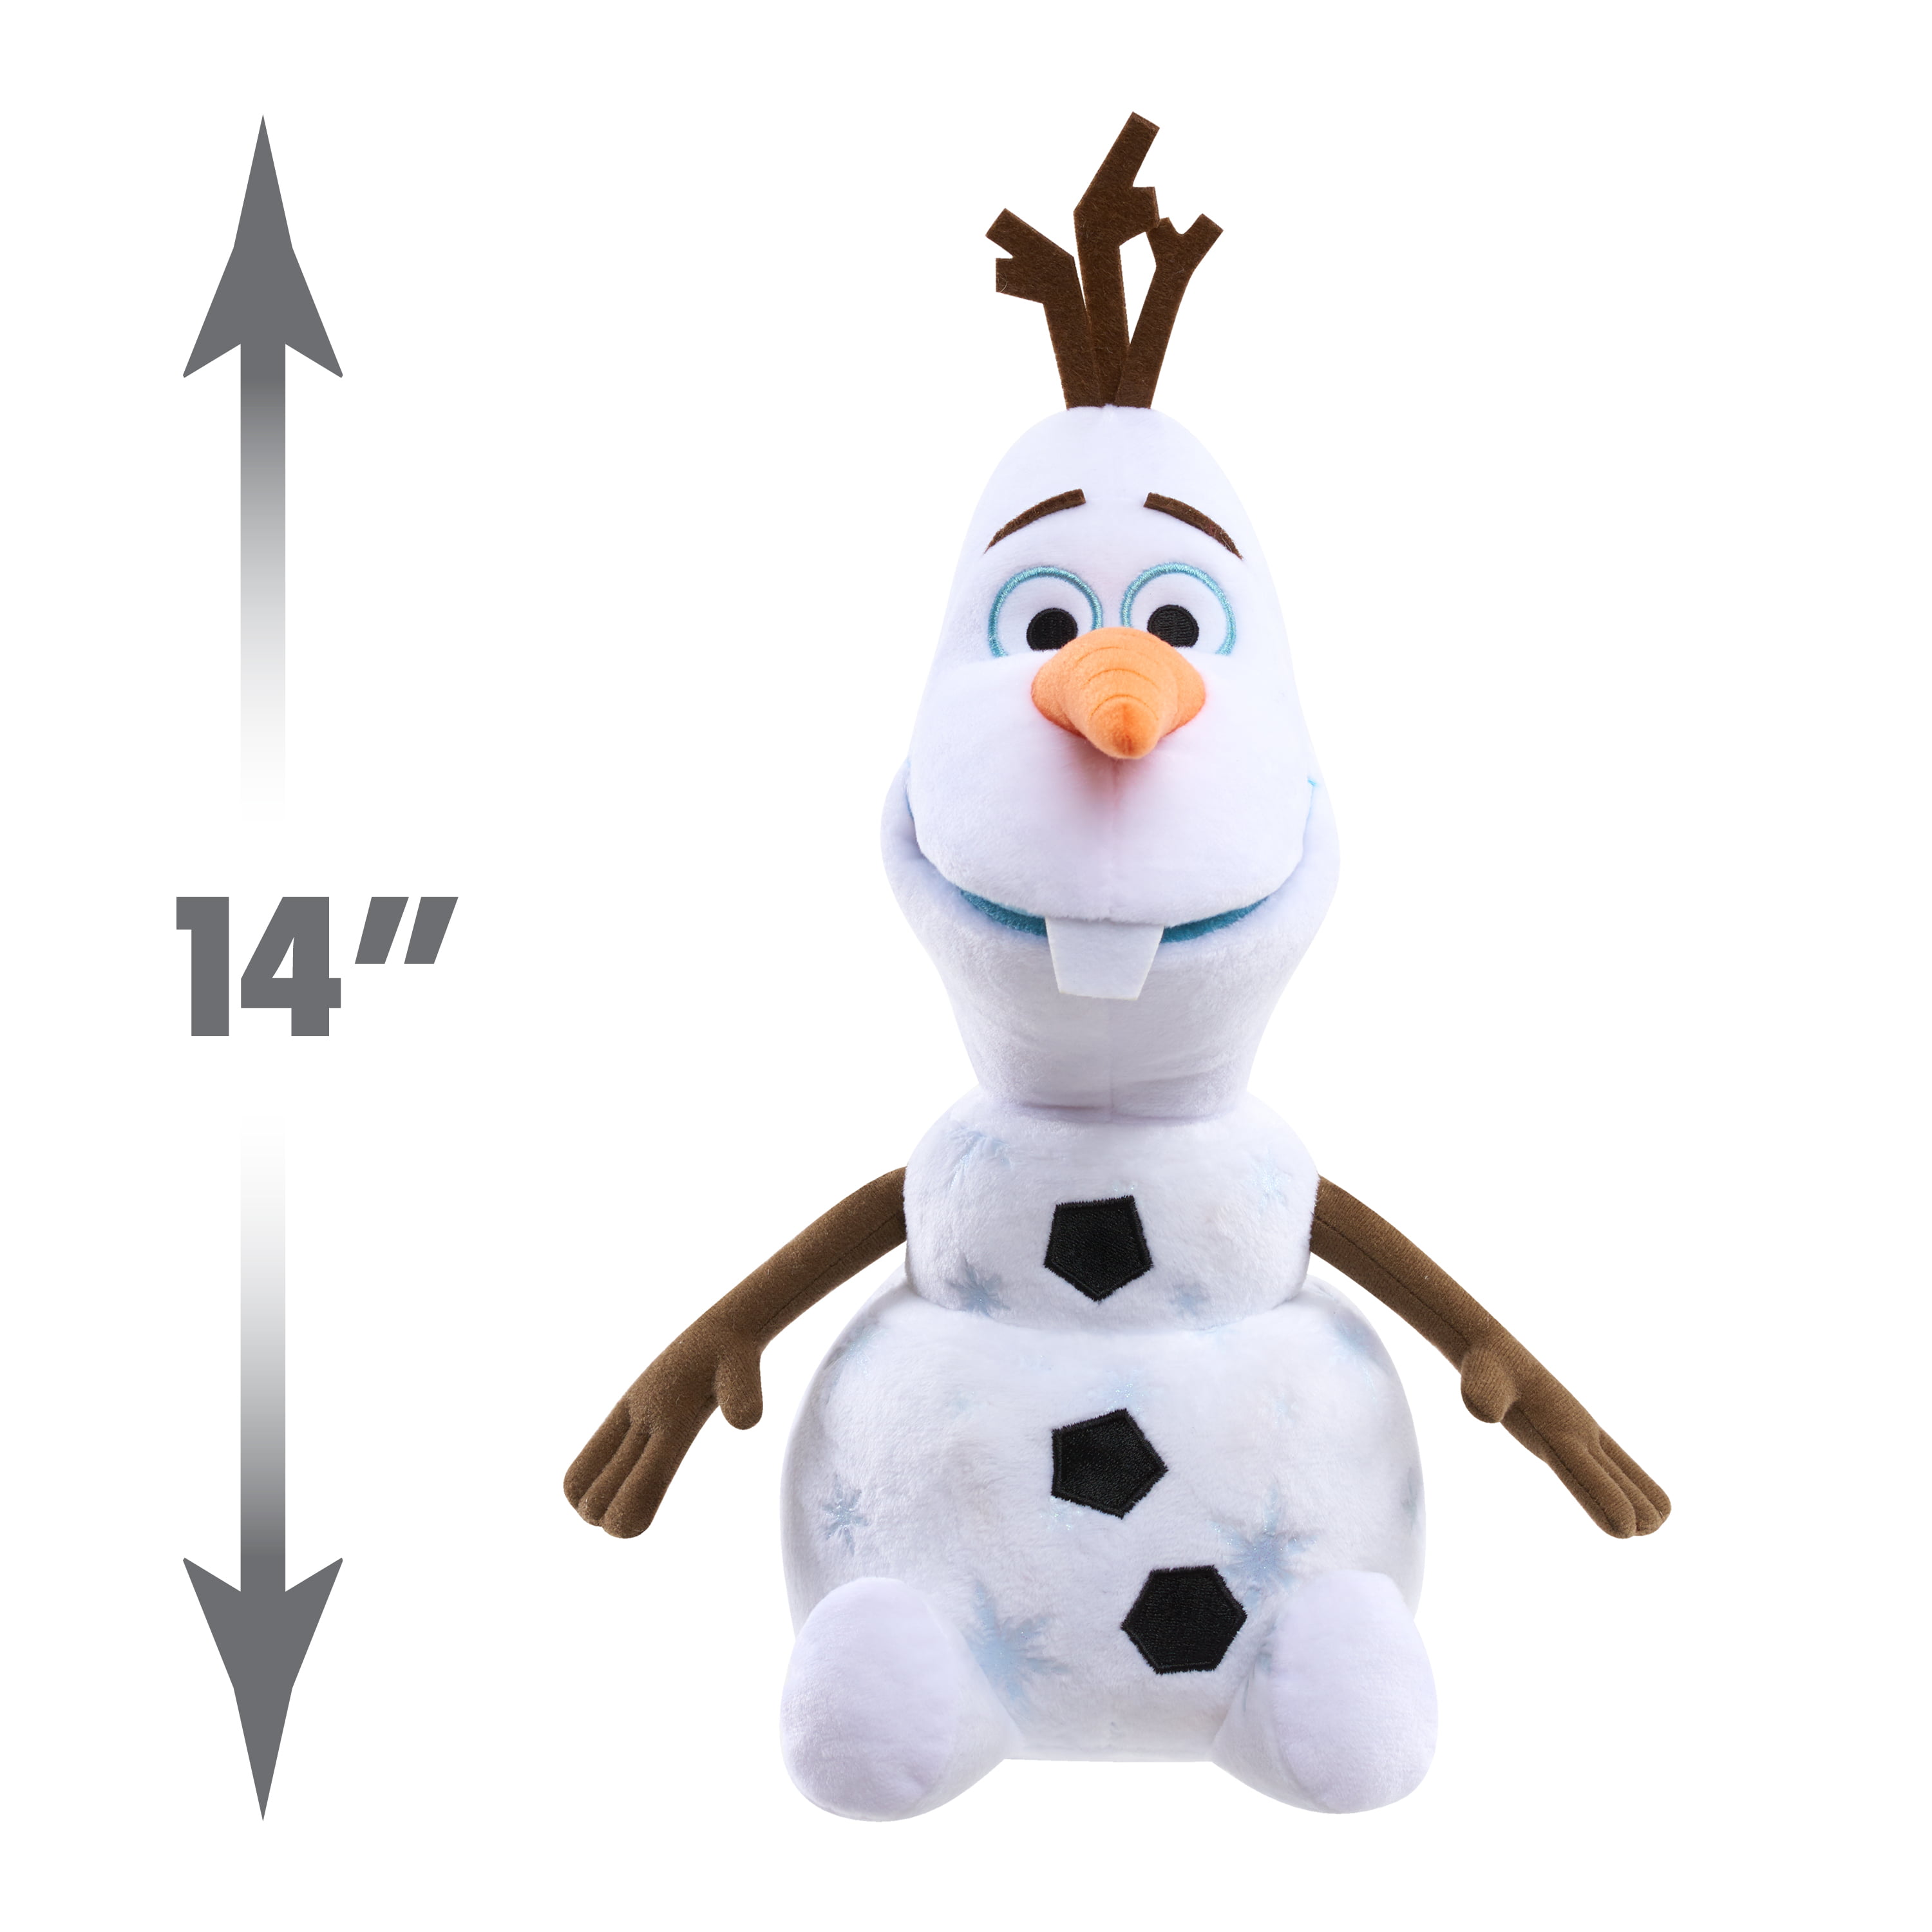 Olaf Disney Frozen Snowman Animated Sing and Swing Plush Toy 14" Inch T32 for sale online 